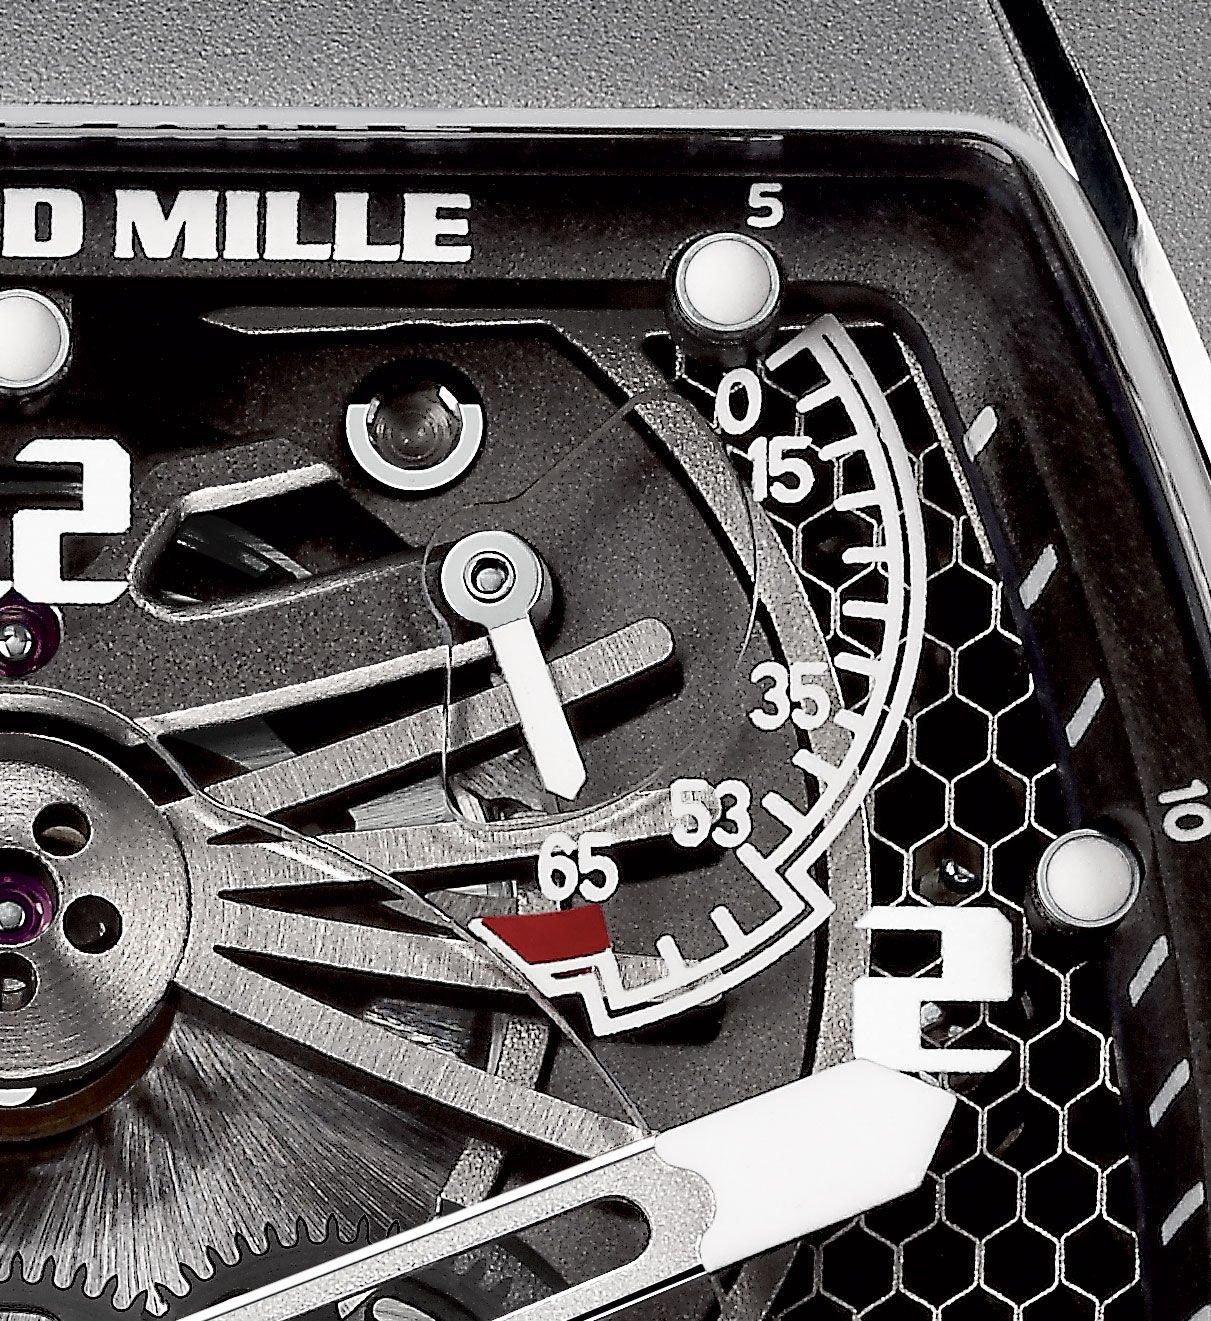 Richard Mille Flyback Chronograph | RM72-01Richard Mille Jean Todt Rm11-03